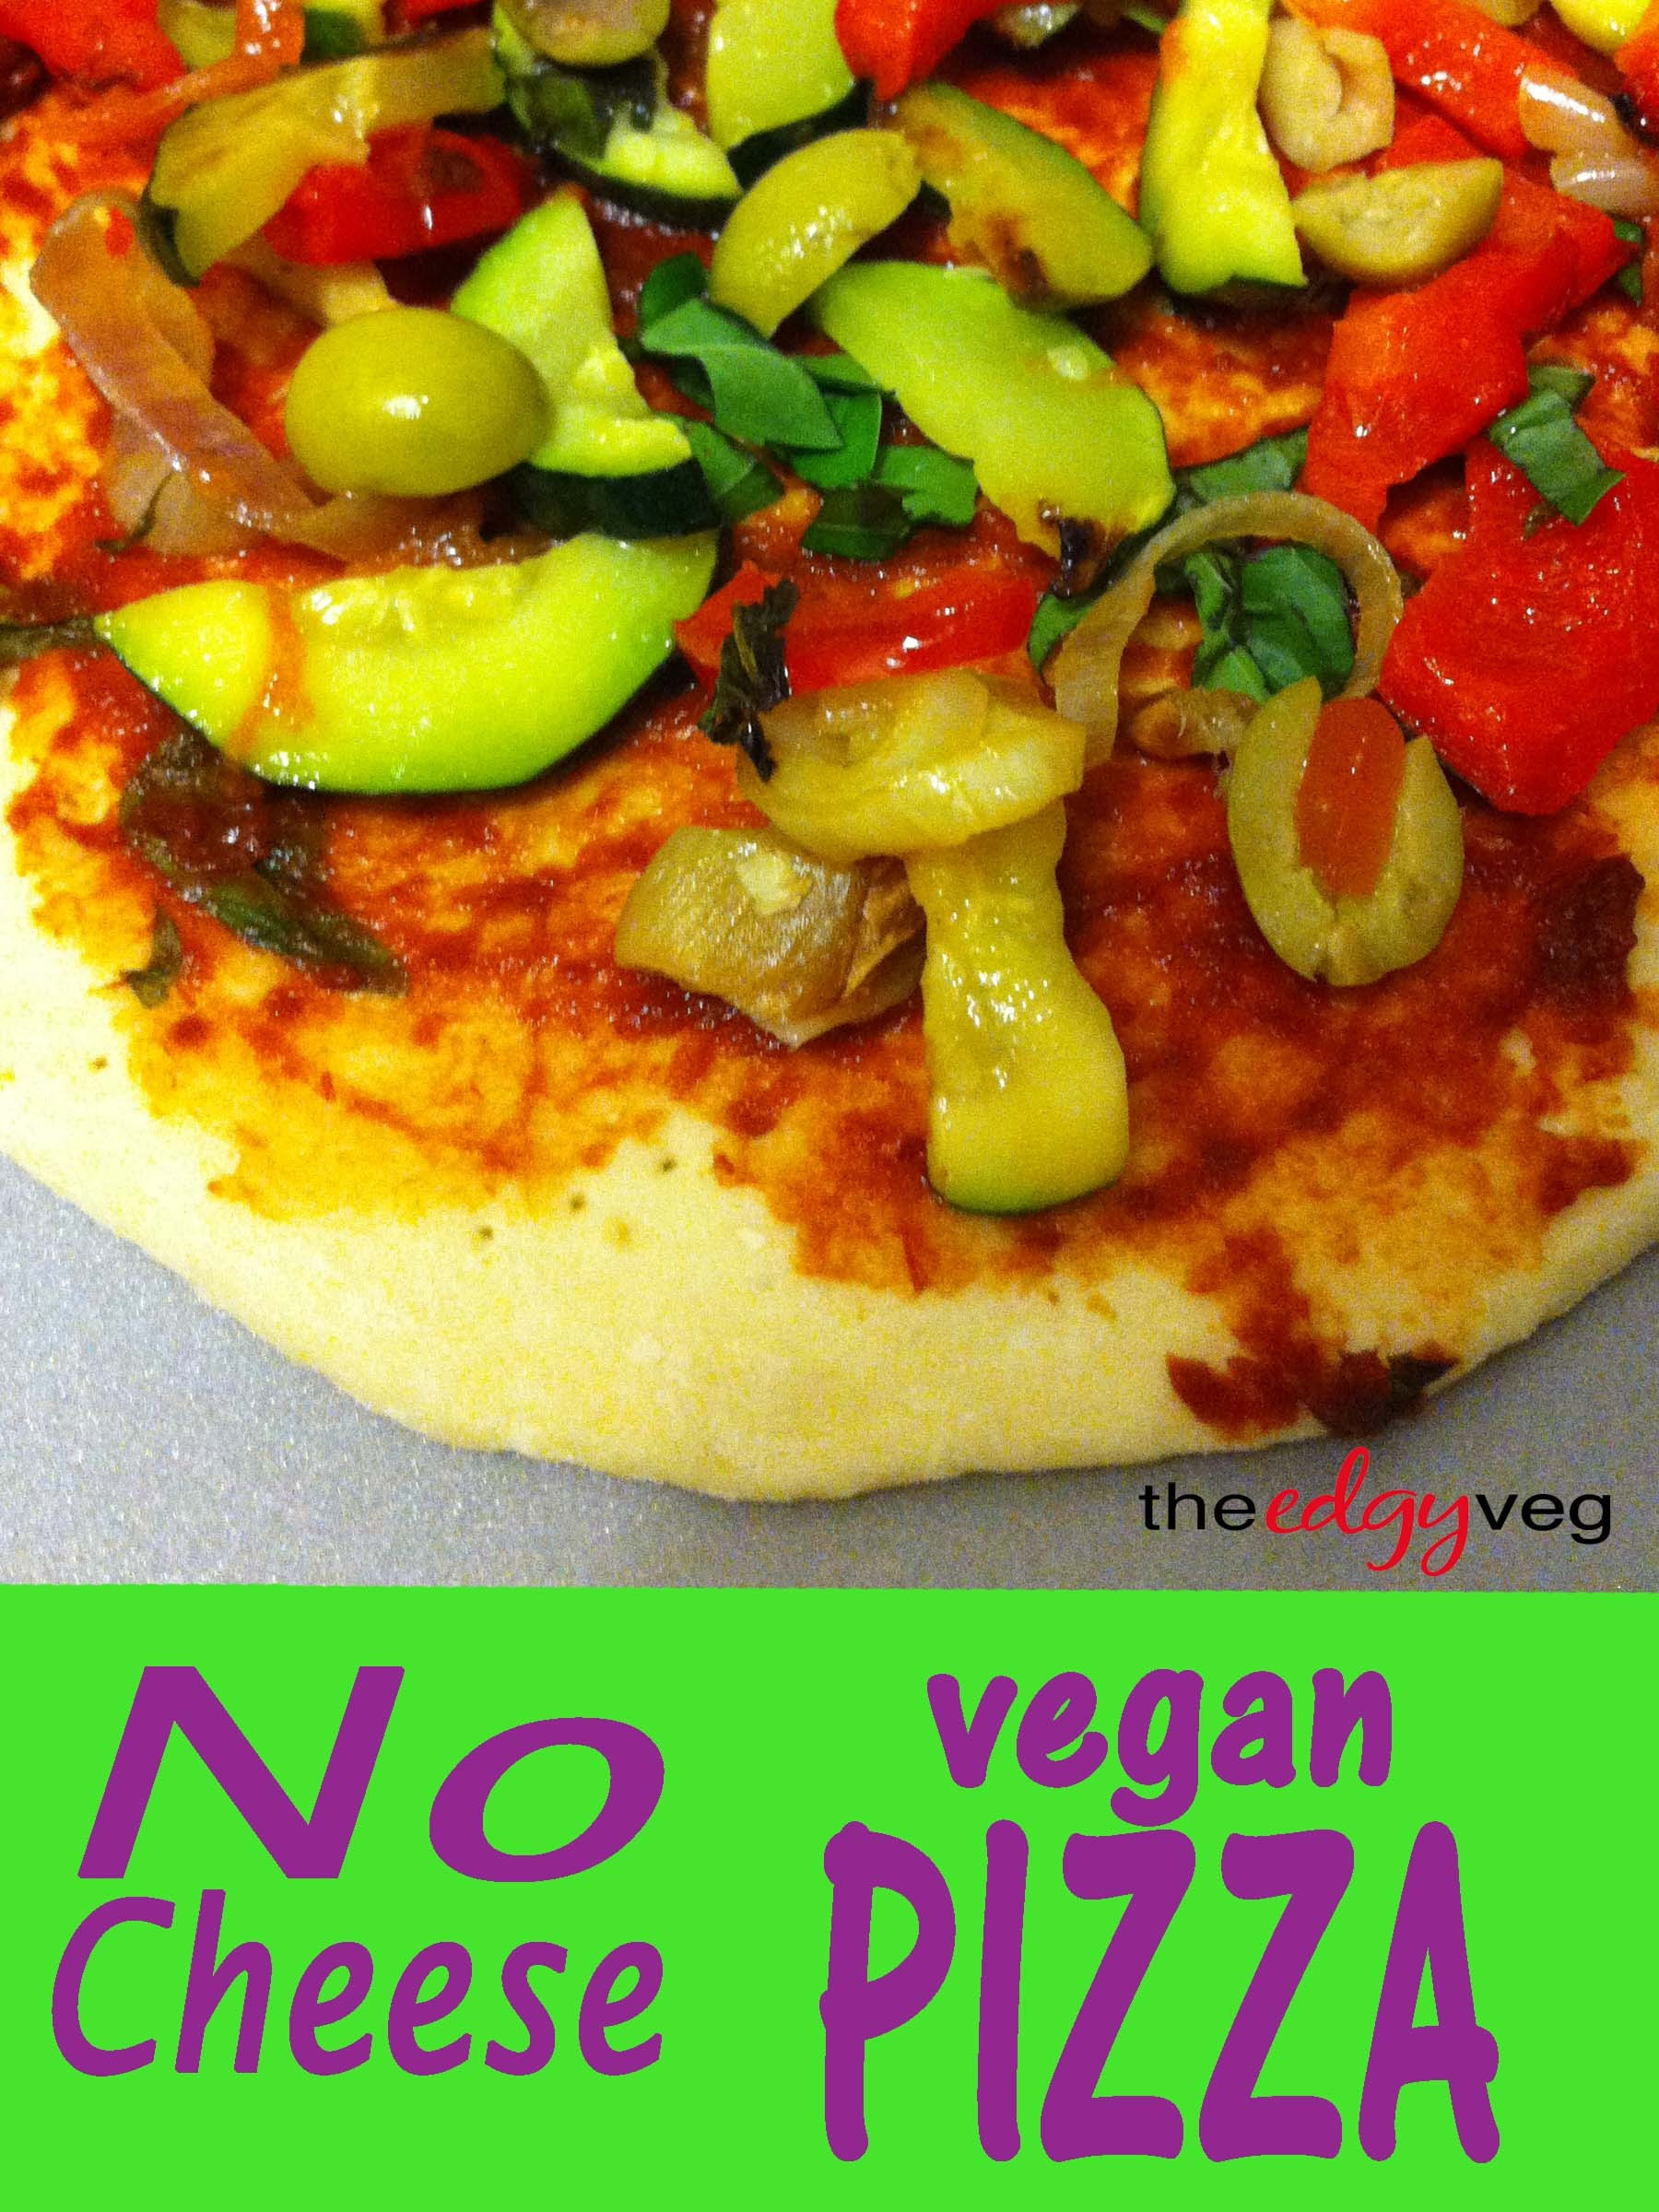 Vegetarian Recipes Without Cheese
 No Cheese Vegan Pizza